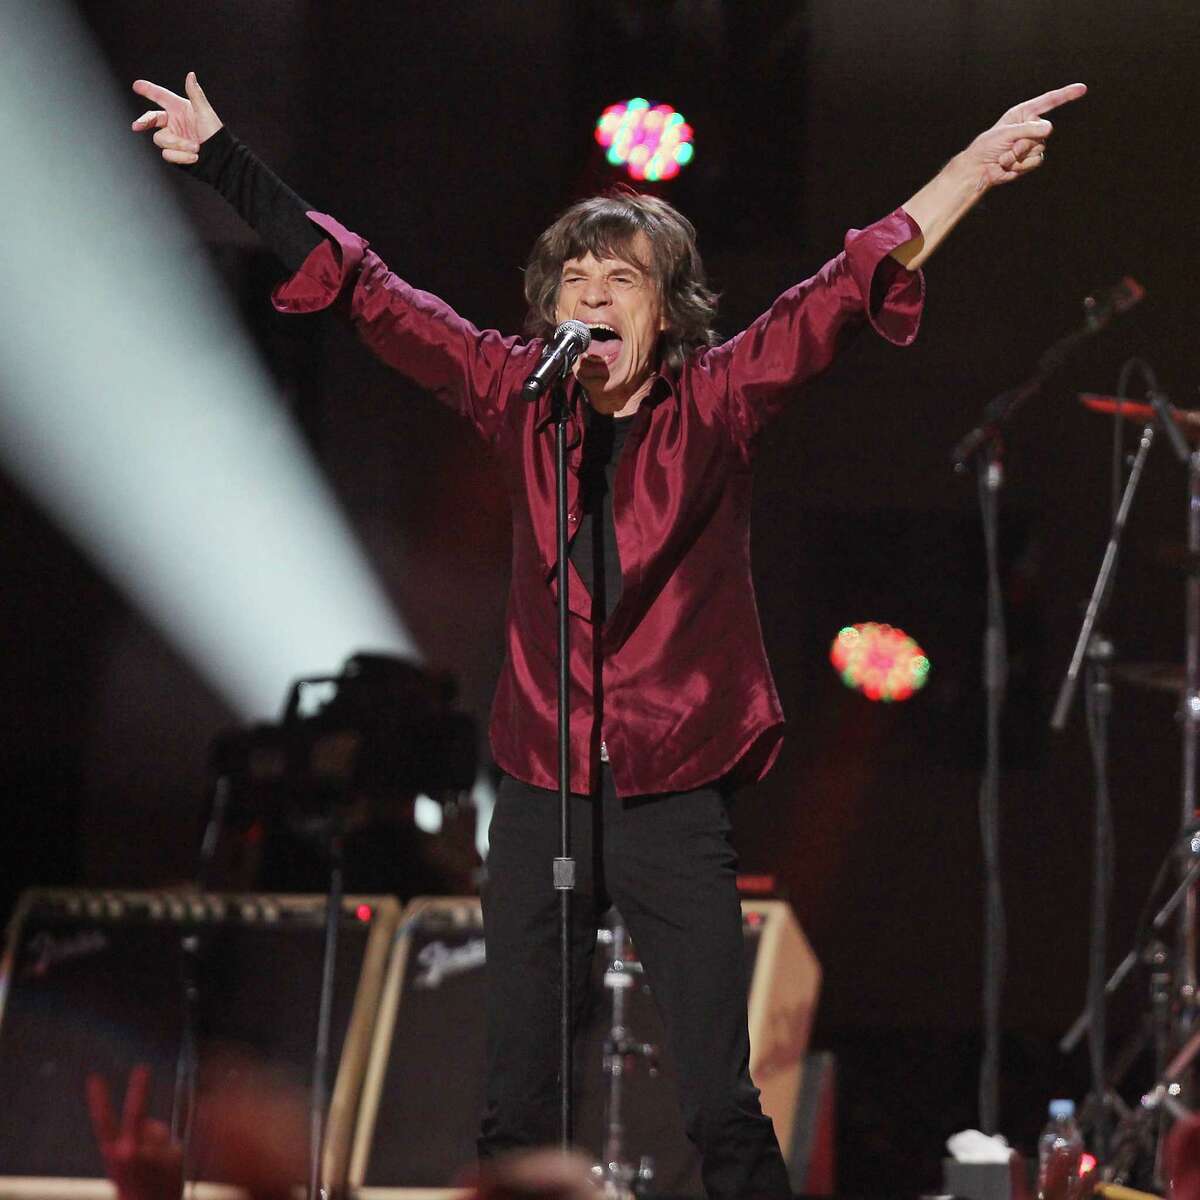 This image released by Starpix shows Mick Jagger of The Rolling Stones performing at the 12-12-12 The Concert for Sandy Relief at Madison Square Garden in New York on Wednesday, Dec. 12, 2012. Proceeds from the show will be distributed through the Robin Hood Foundation. (AP Photo/Starpix, Dave Allocca)